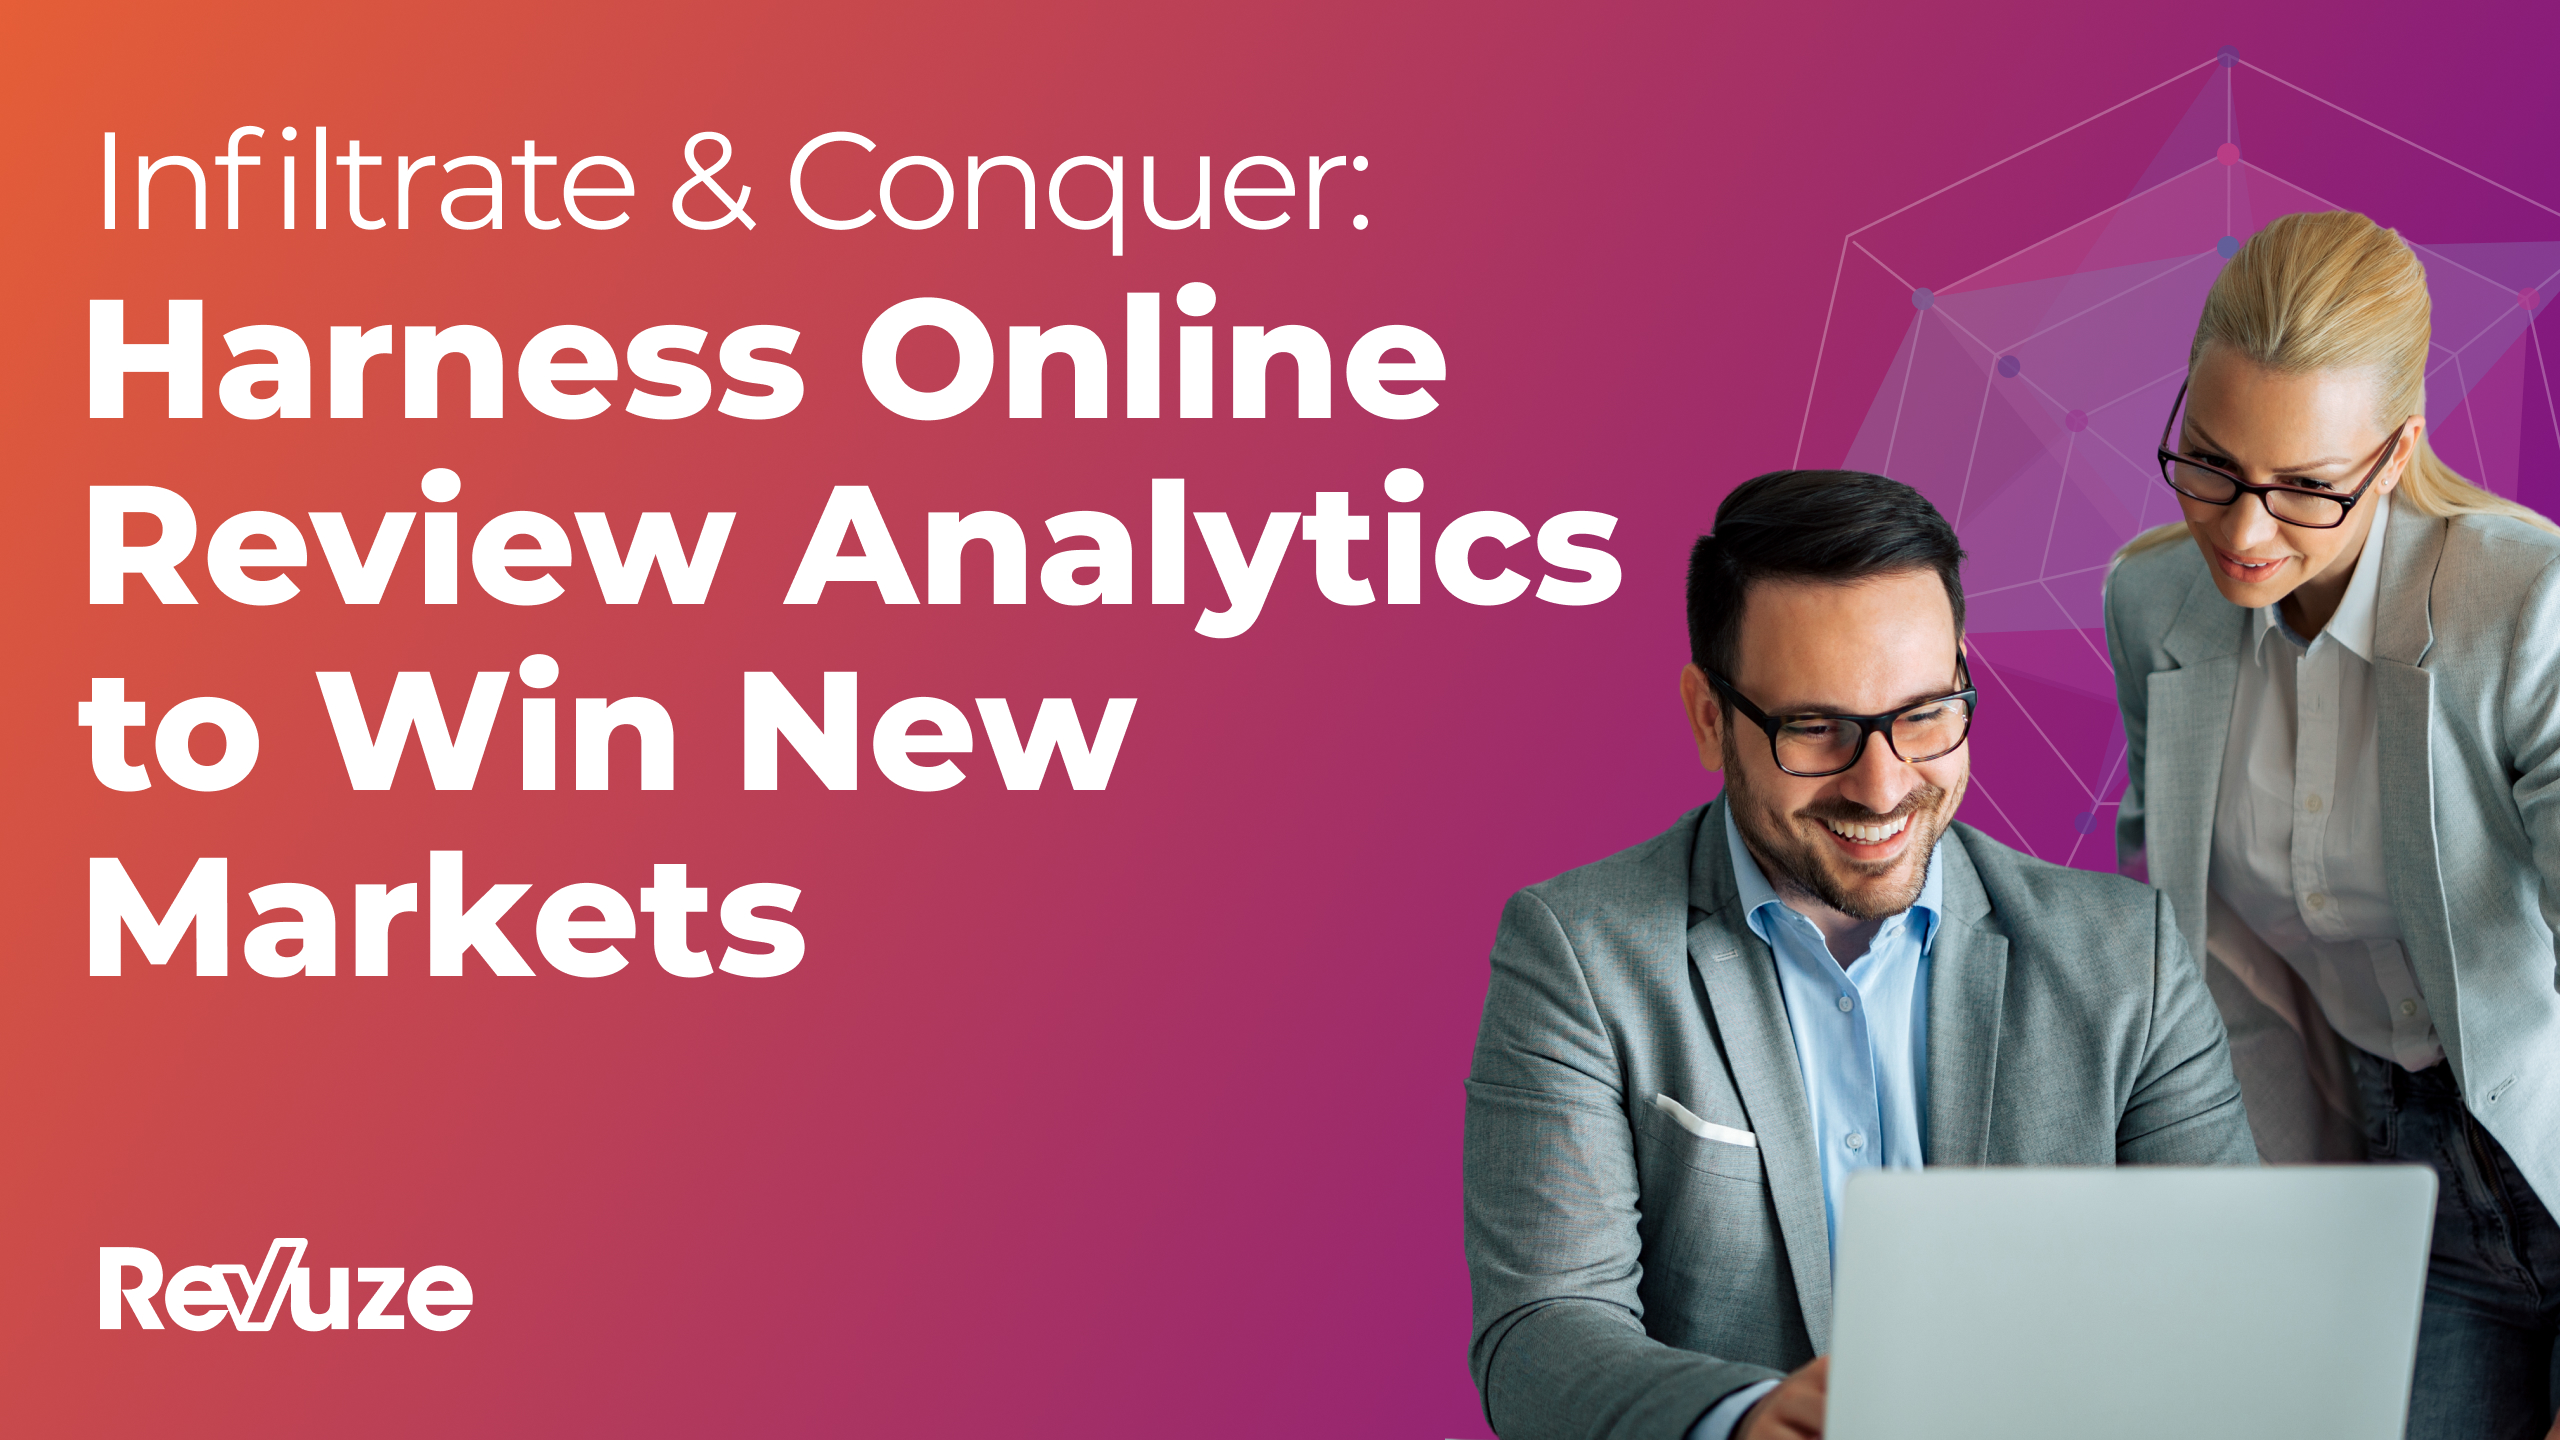 Infiltrate & Conquer: Harness Online Review Analytics to Win New Markets